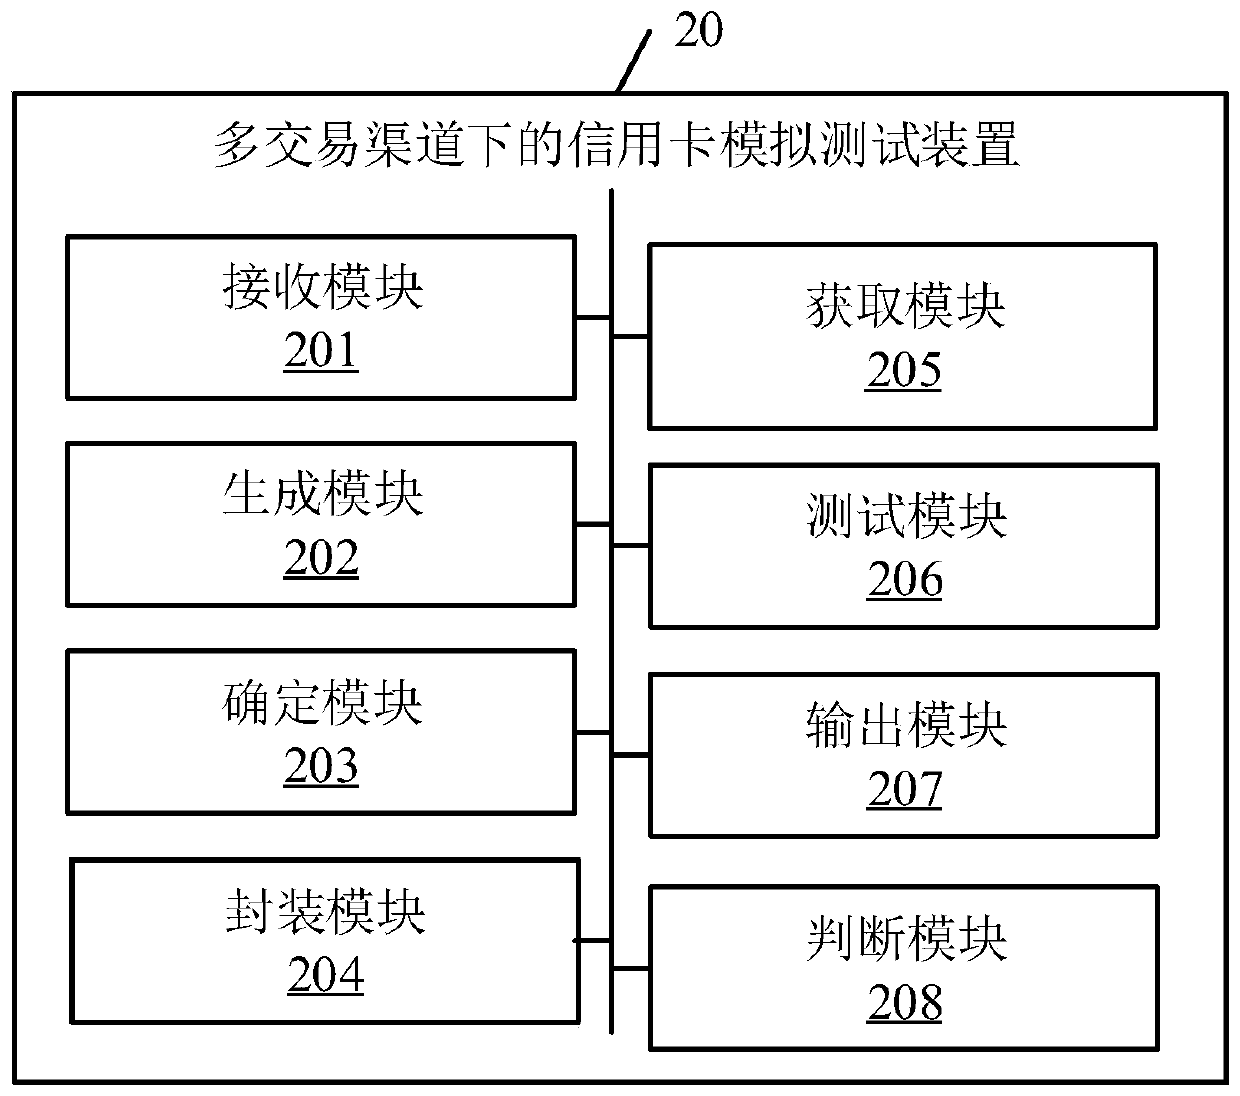 Credit card simulation test method under multiple transaction channels and related equipment